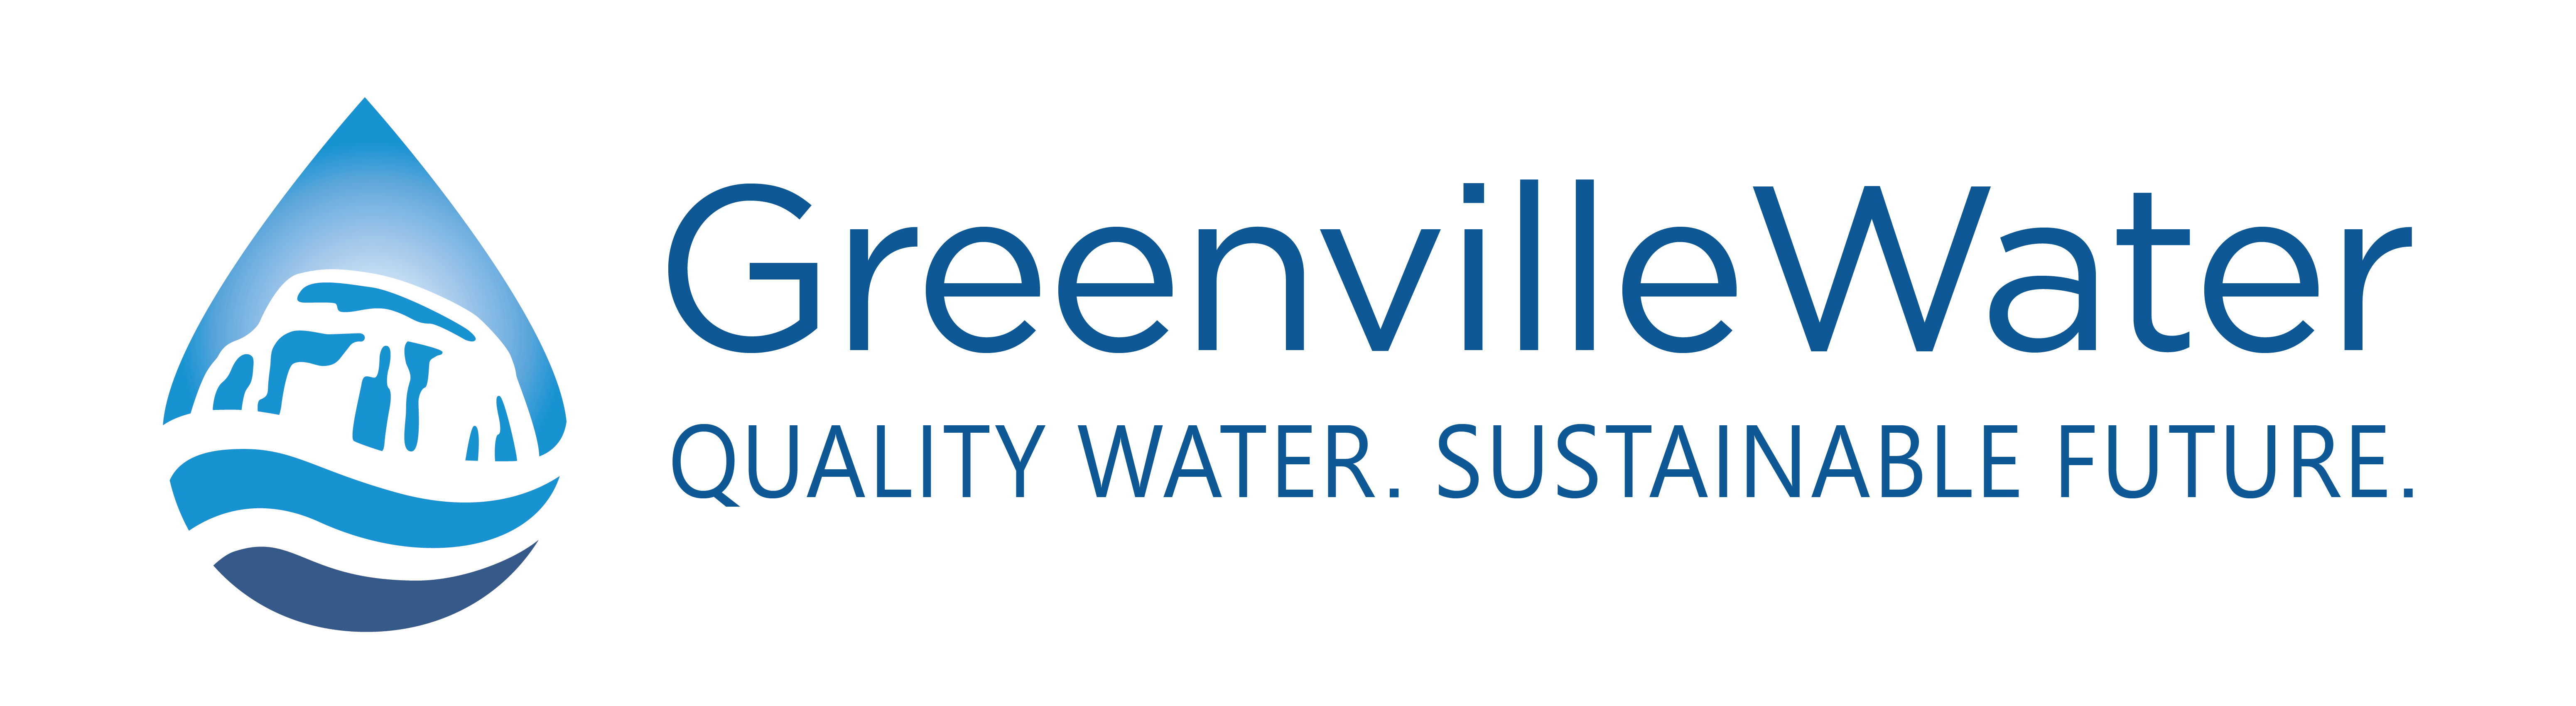 Greenville Water Logo With Tagline Color 01